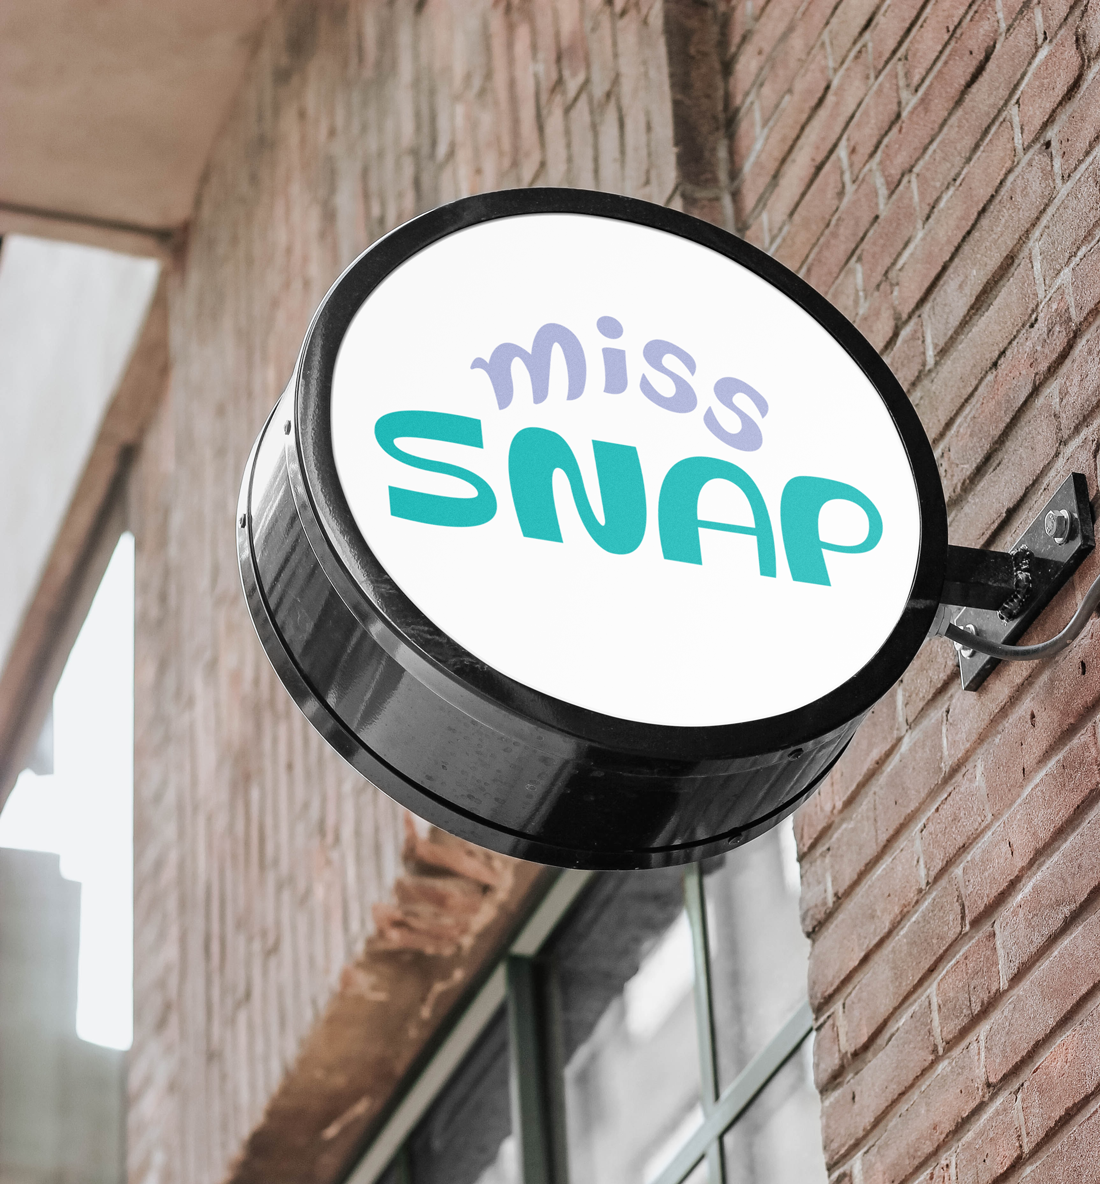 Miss Snap Brand Identity and Packaging - Image 5